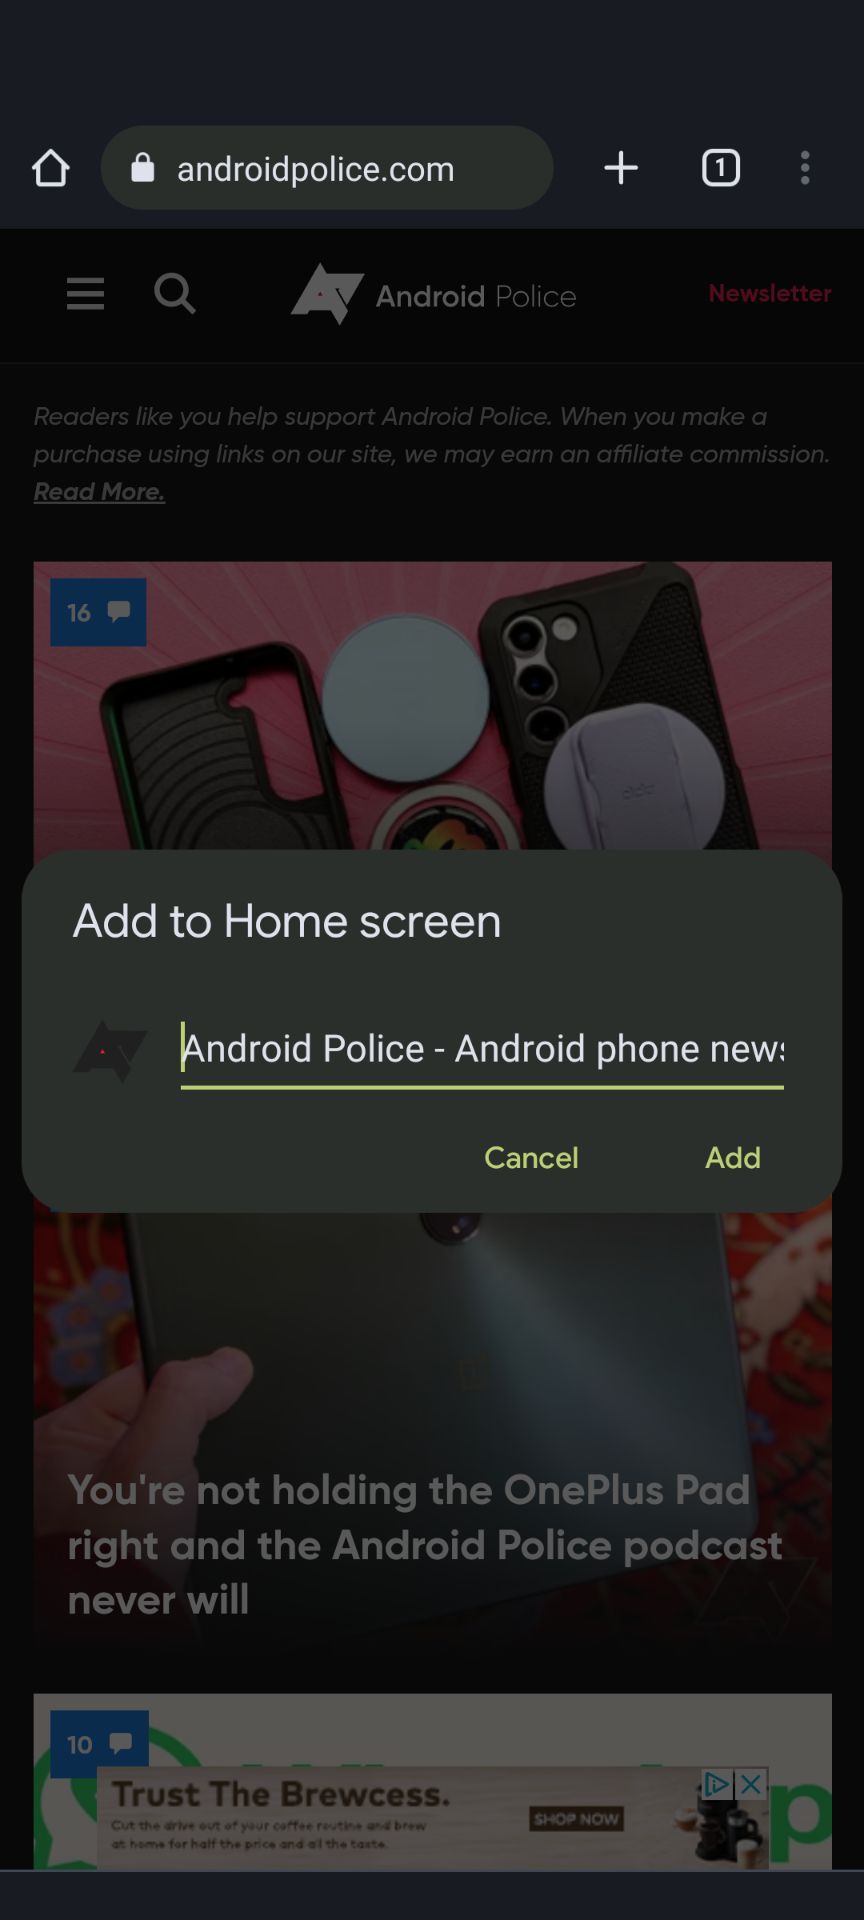 The Add to Home screen dialog box in the Chrome mobile app